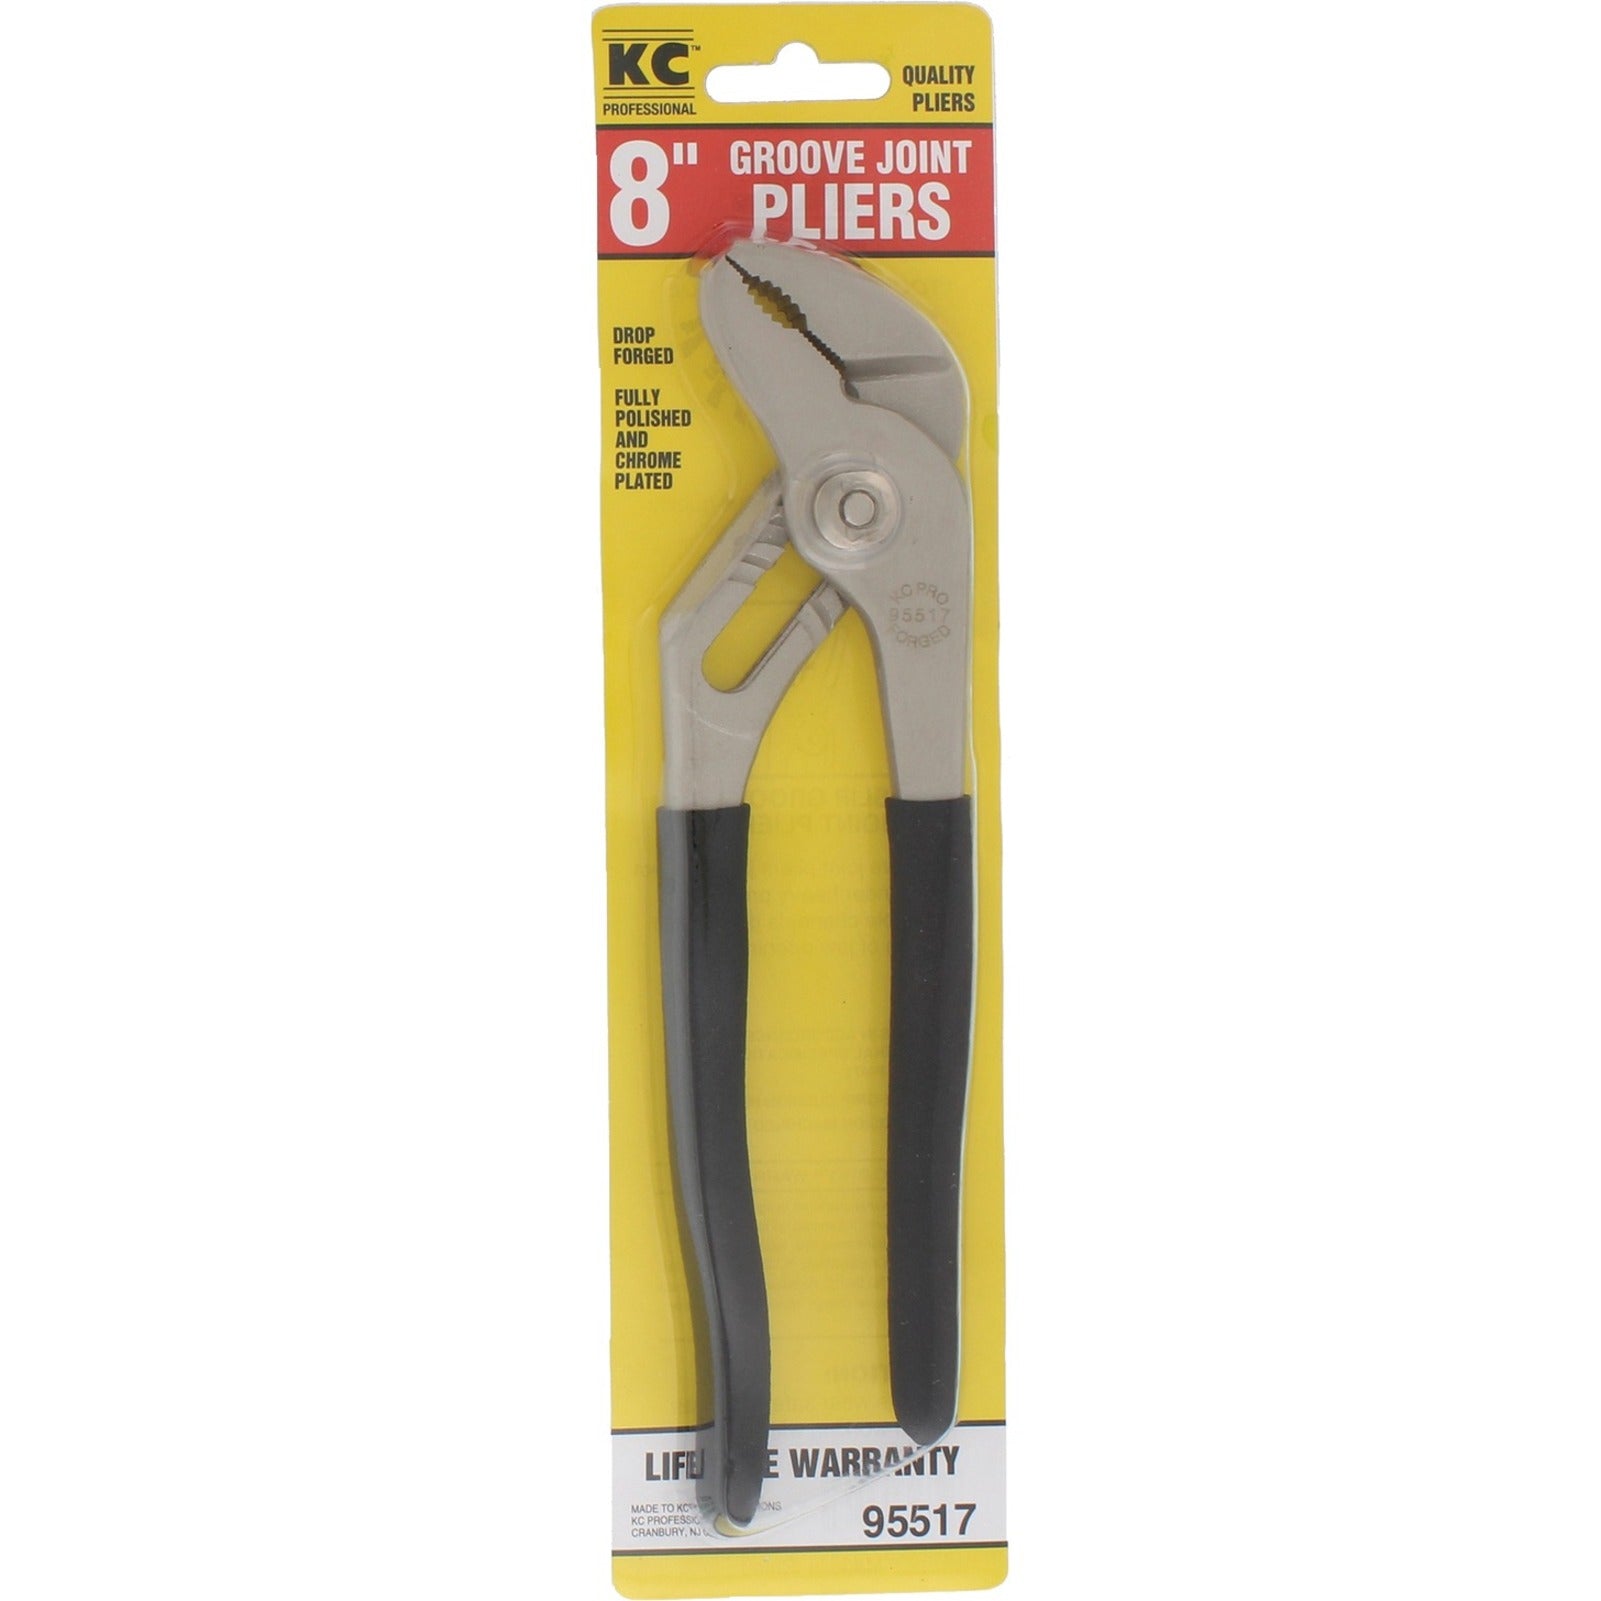 HB Smith 95517 8" Slip-Groove Pliers, Heavy Duty, Chrome Plated, Durable, Non-slip Grip, Drop Forged